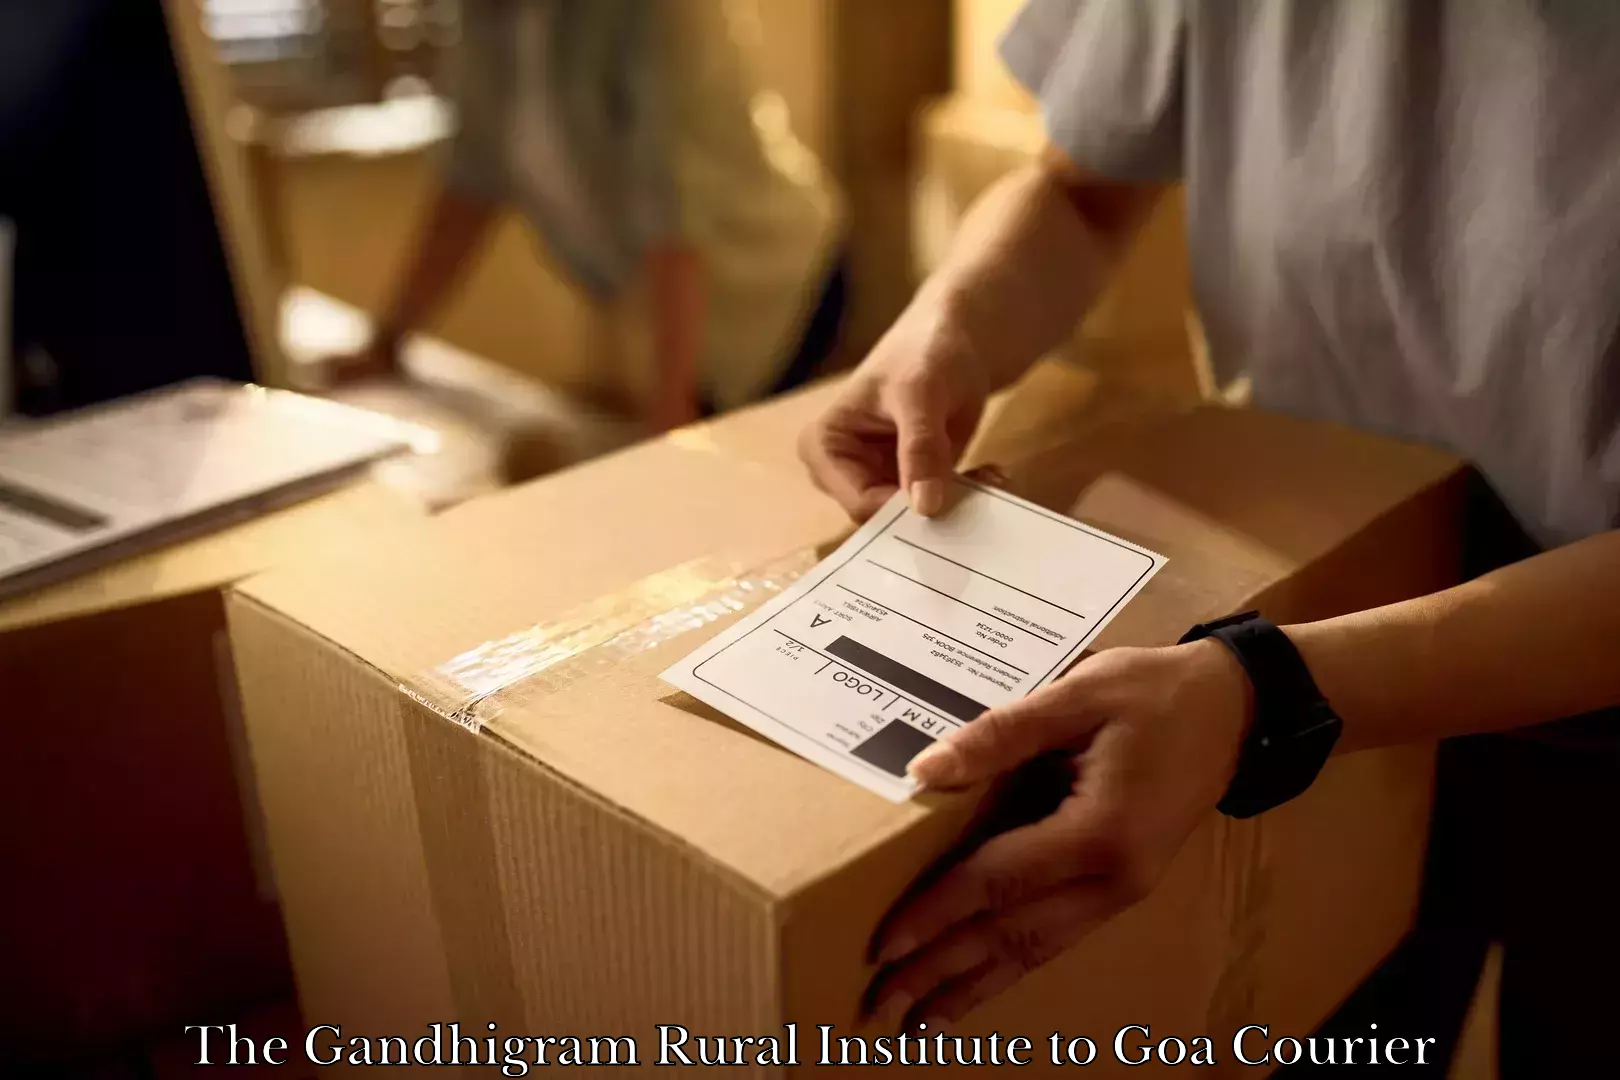 Expert packing and moving The Gandhigram Rural Institute to Goa